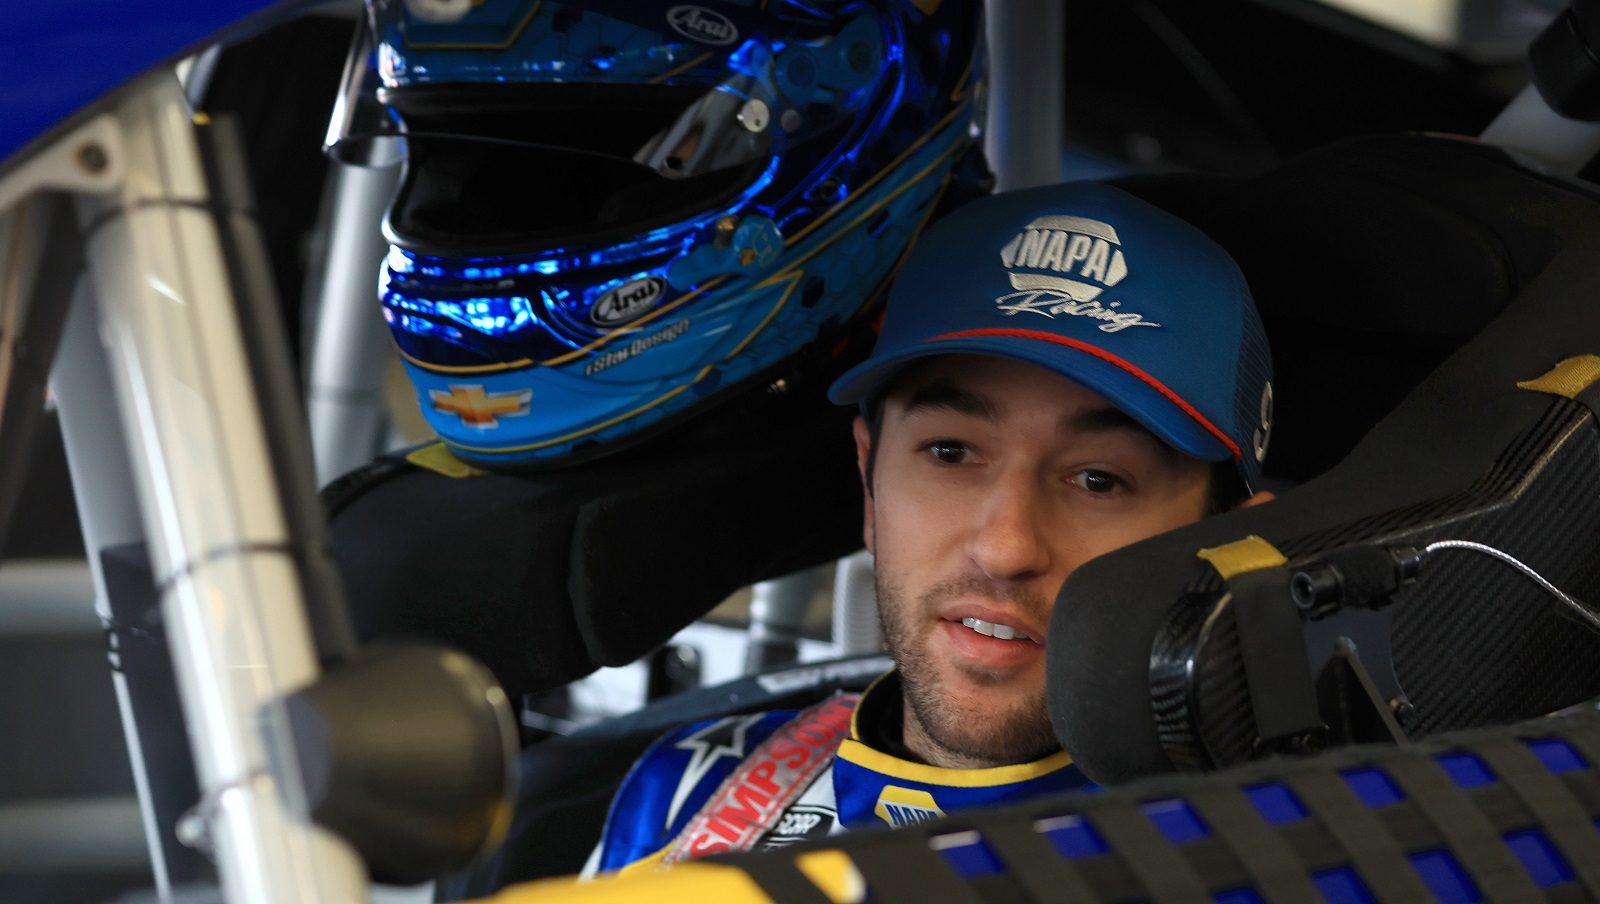 Chase Elliott, driver of the No. 9 Chevrolet, sits in his car in the garage during practice for the Daytona 500 at Daytona International Speedway on Feb. 19, 2022.